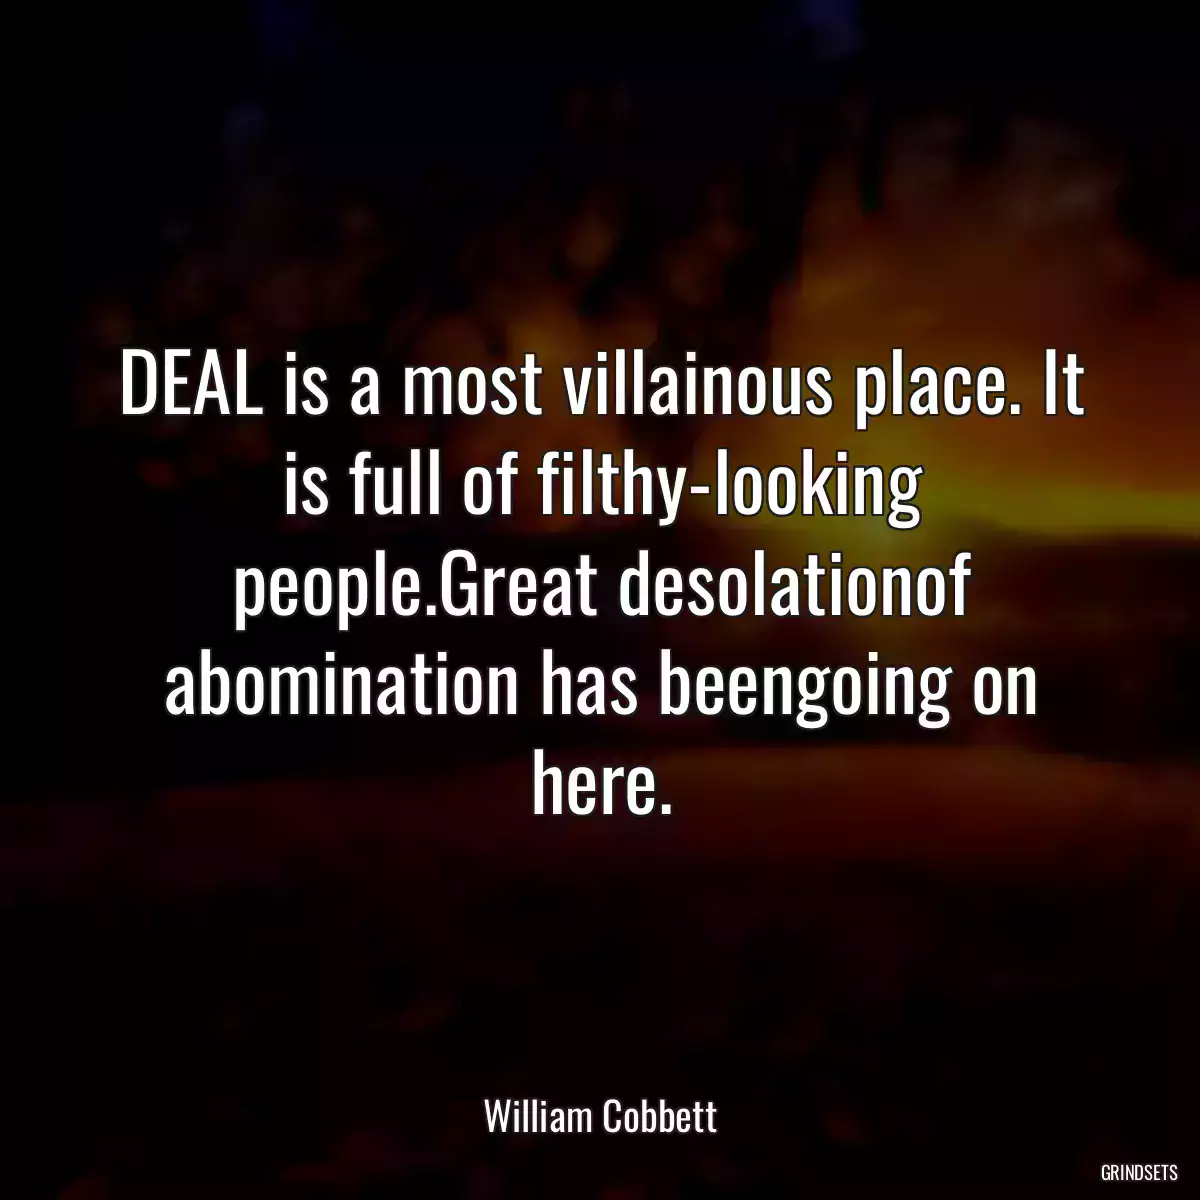 DEAL is a most villainous place. It is full of filthy-looking people.Great desolationof abomination has beengoing on here.